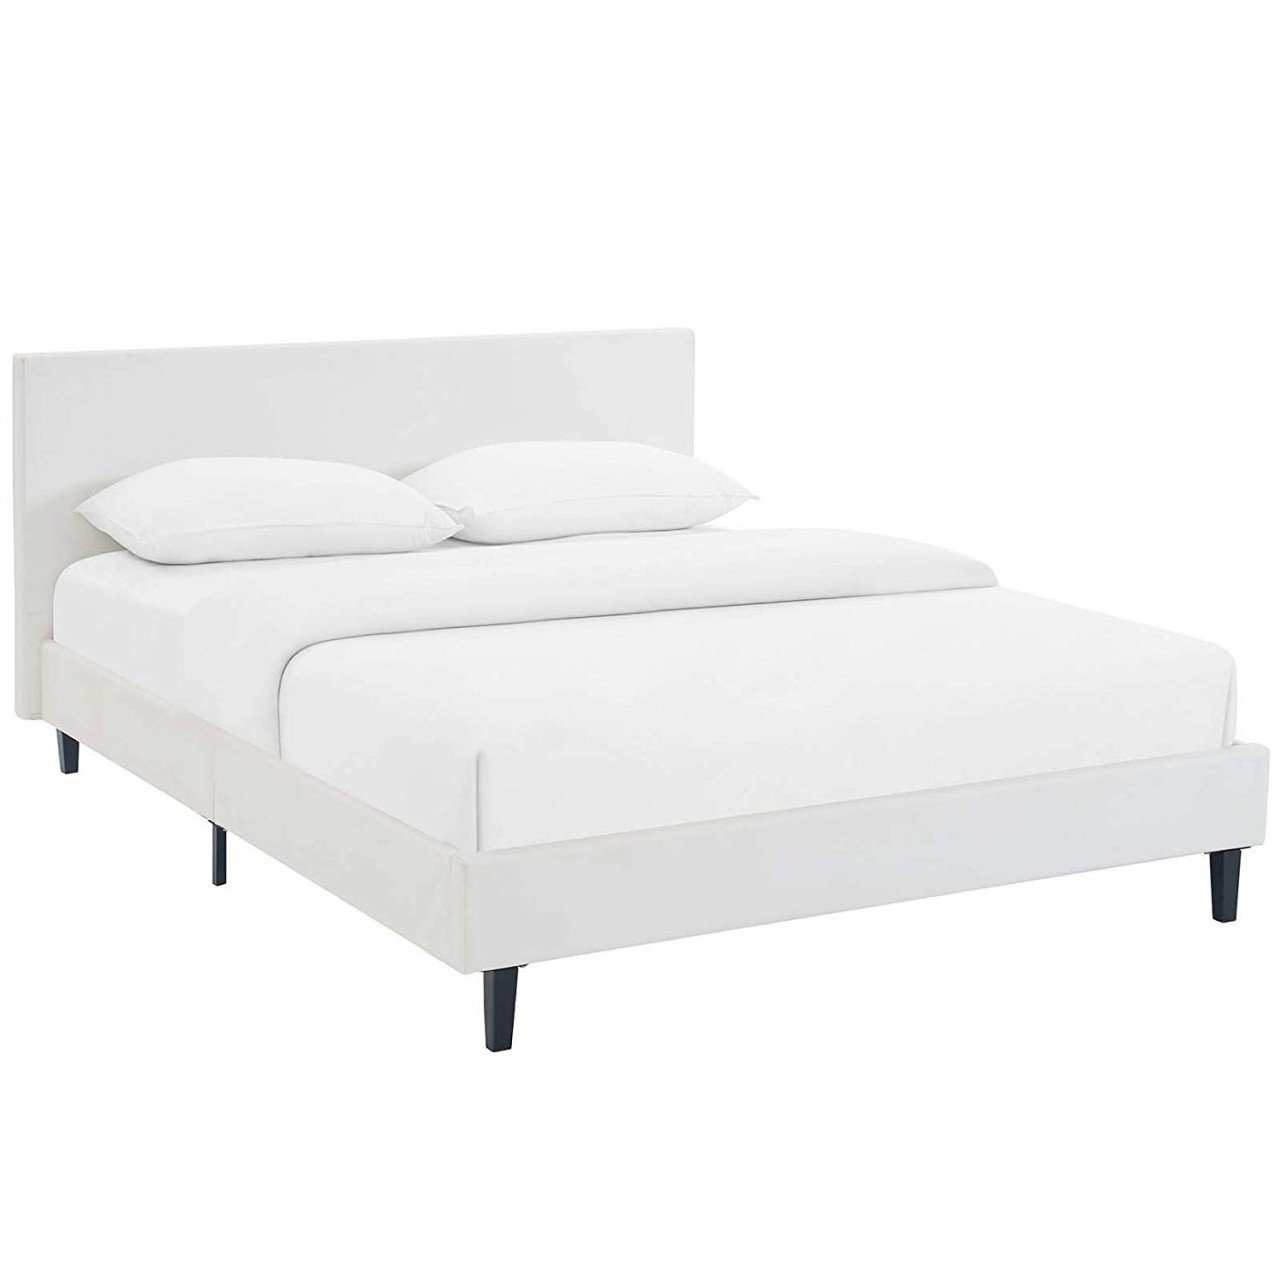 Used King Size Bedroom Set New White Metal Full Size Bed — Procura Home Blog